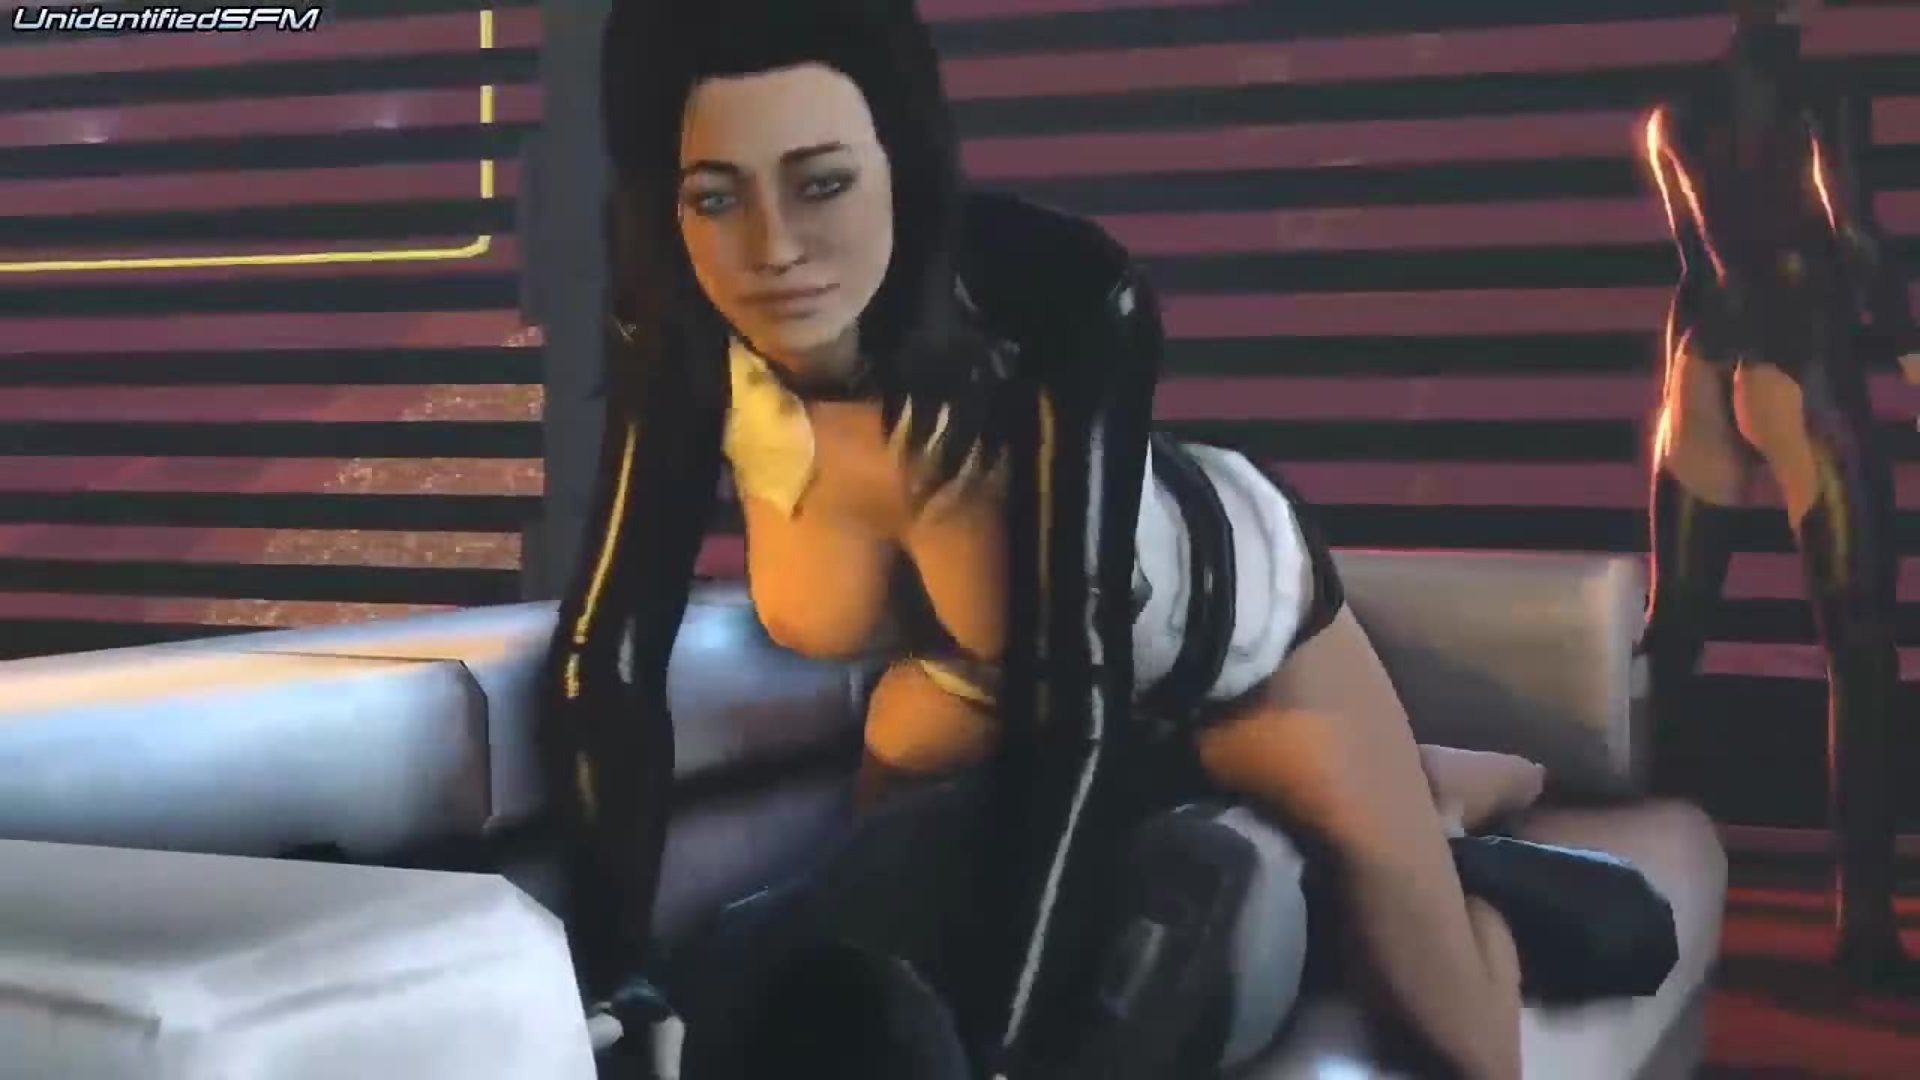 The Citadel After Party Mass Effect girls in sex party orgy